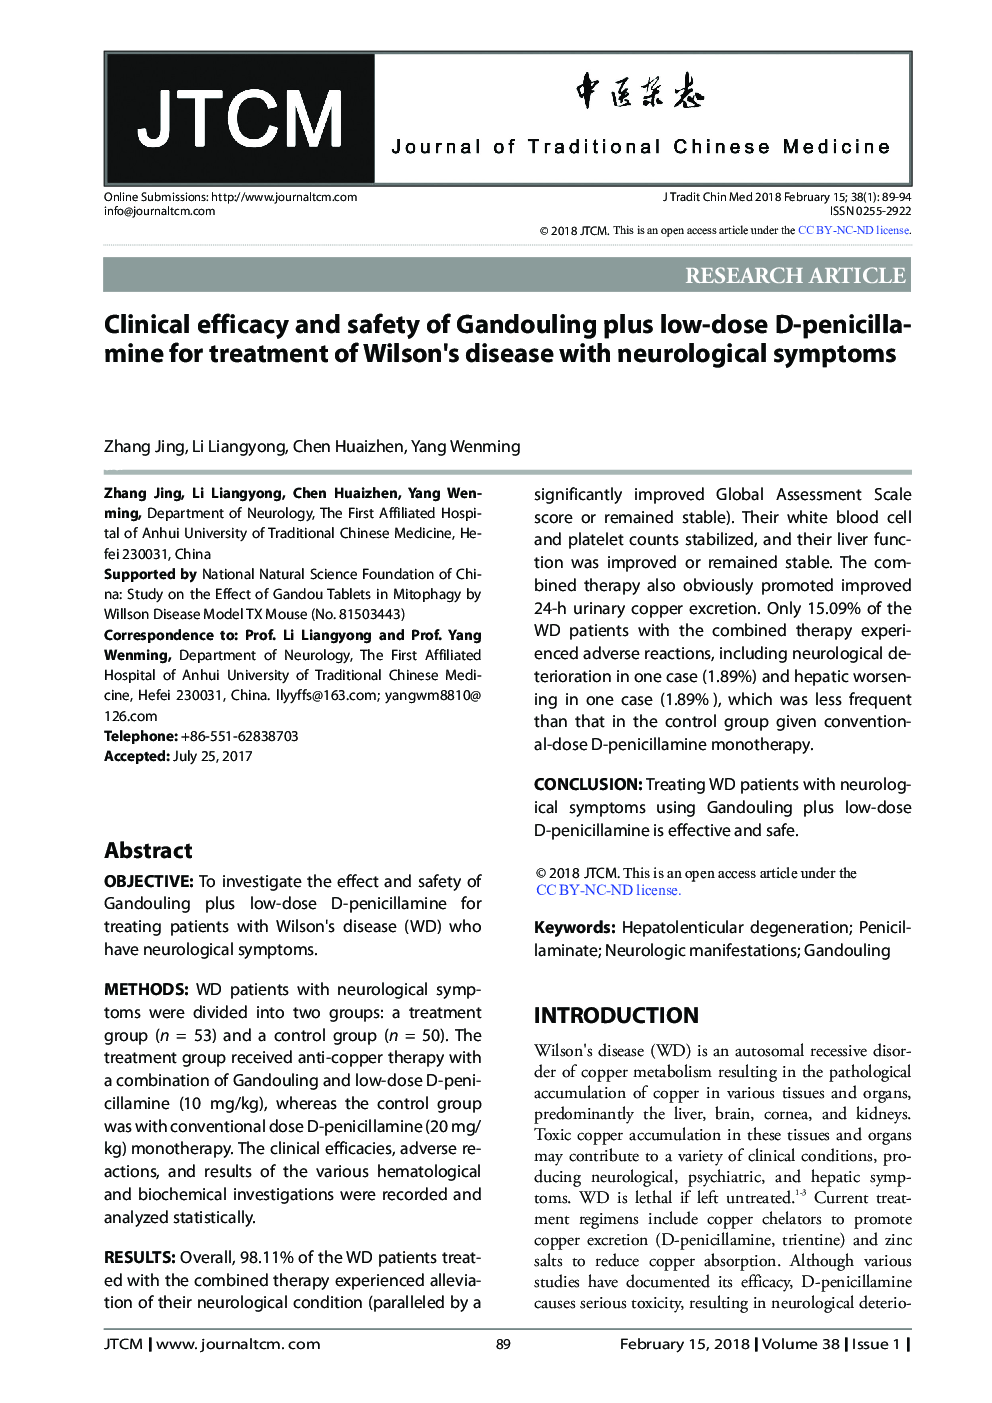 Clinical efficacy and safety of Gandouling plus low-dose D-penicillamine for treatment of Wilson's disease with neurological symptoms